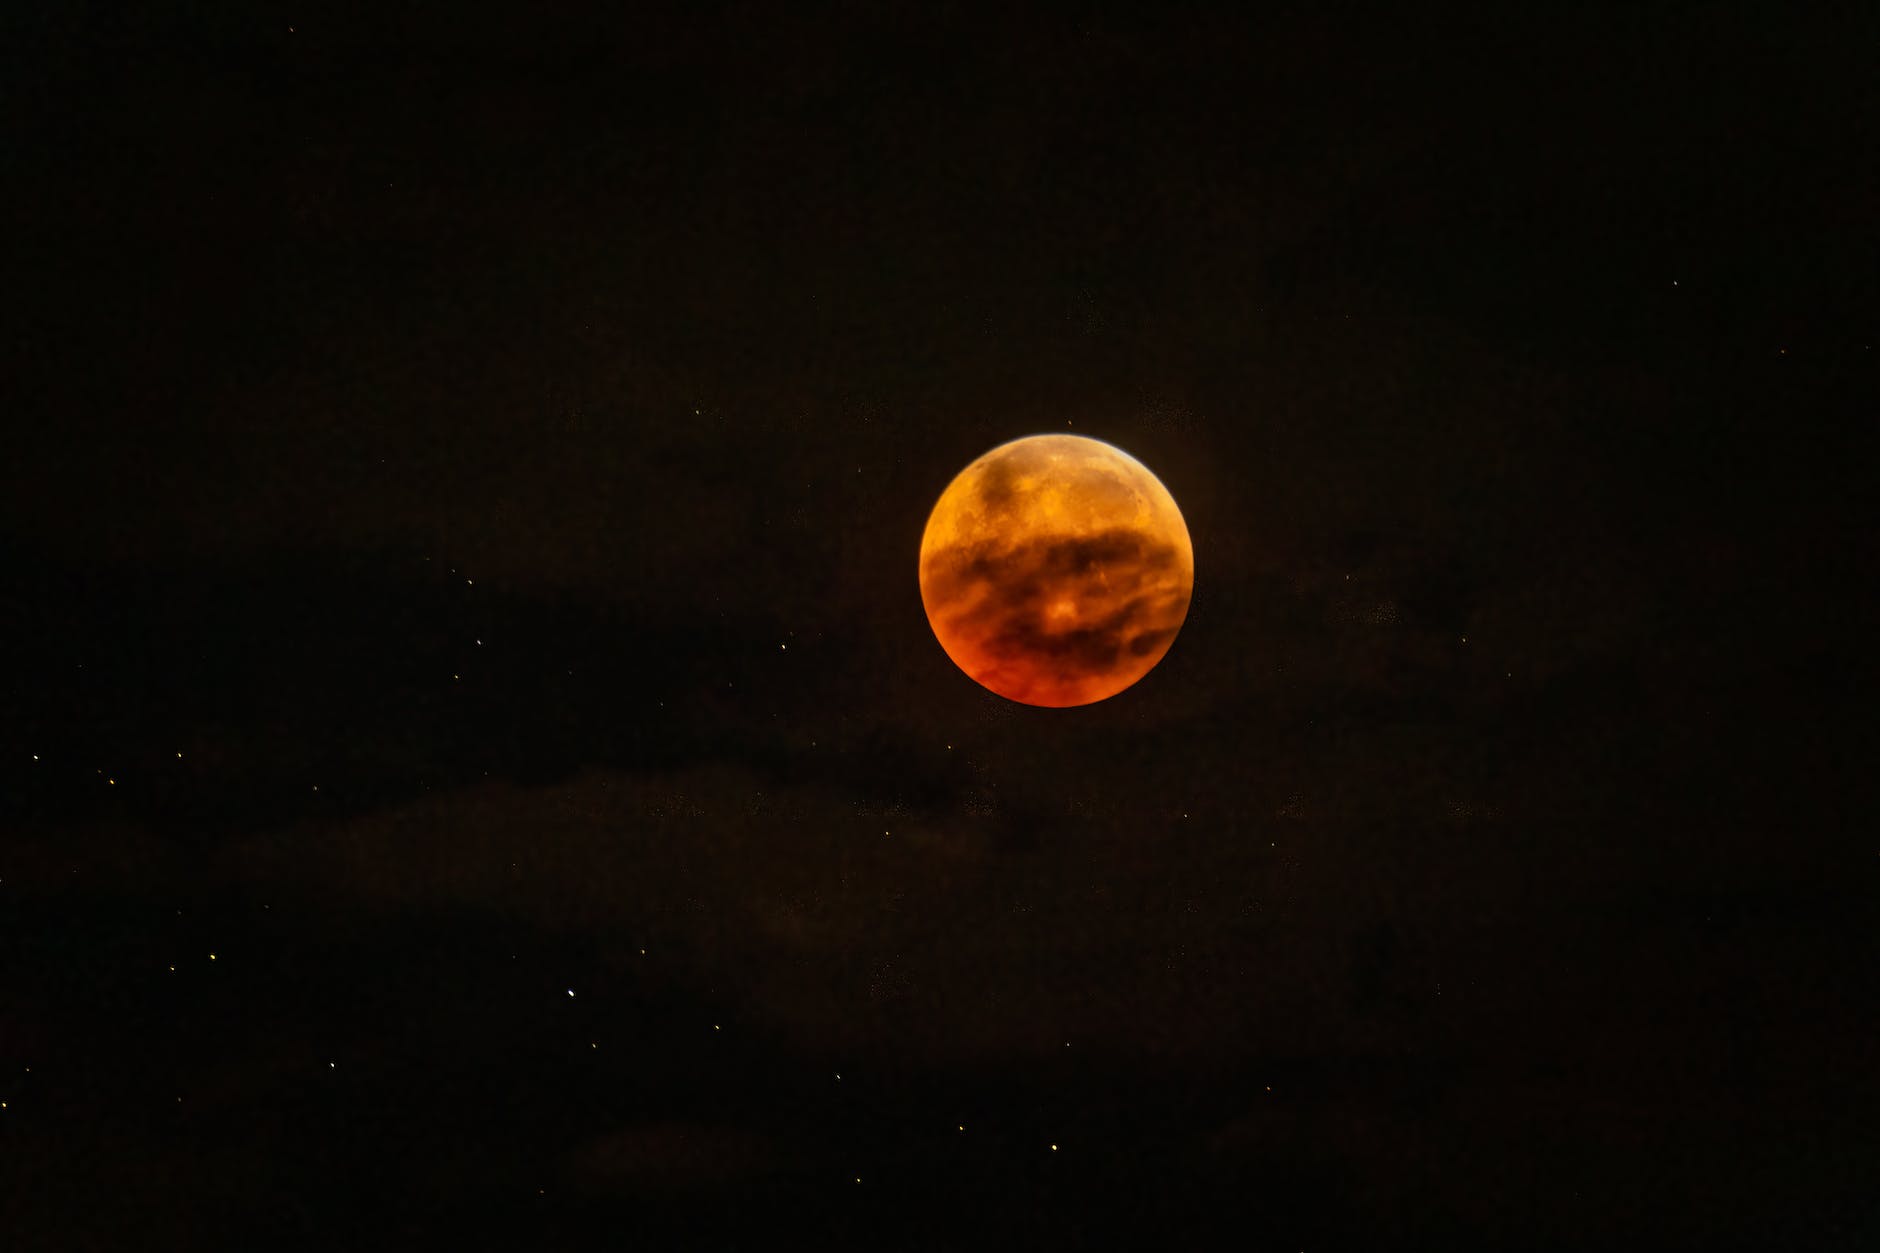 Photo by Tom Fisk on <a href="https://www.pexels.com/photo/full-moon-in-the-dark-night-sky-15113200/" rel="nofollow">Pexels.com</a>